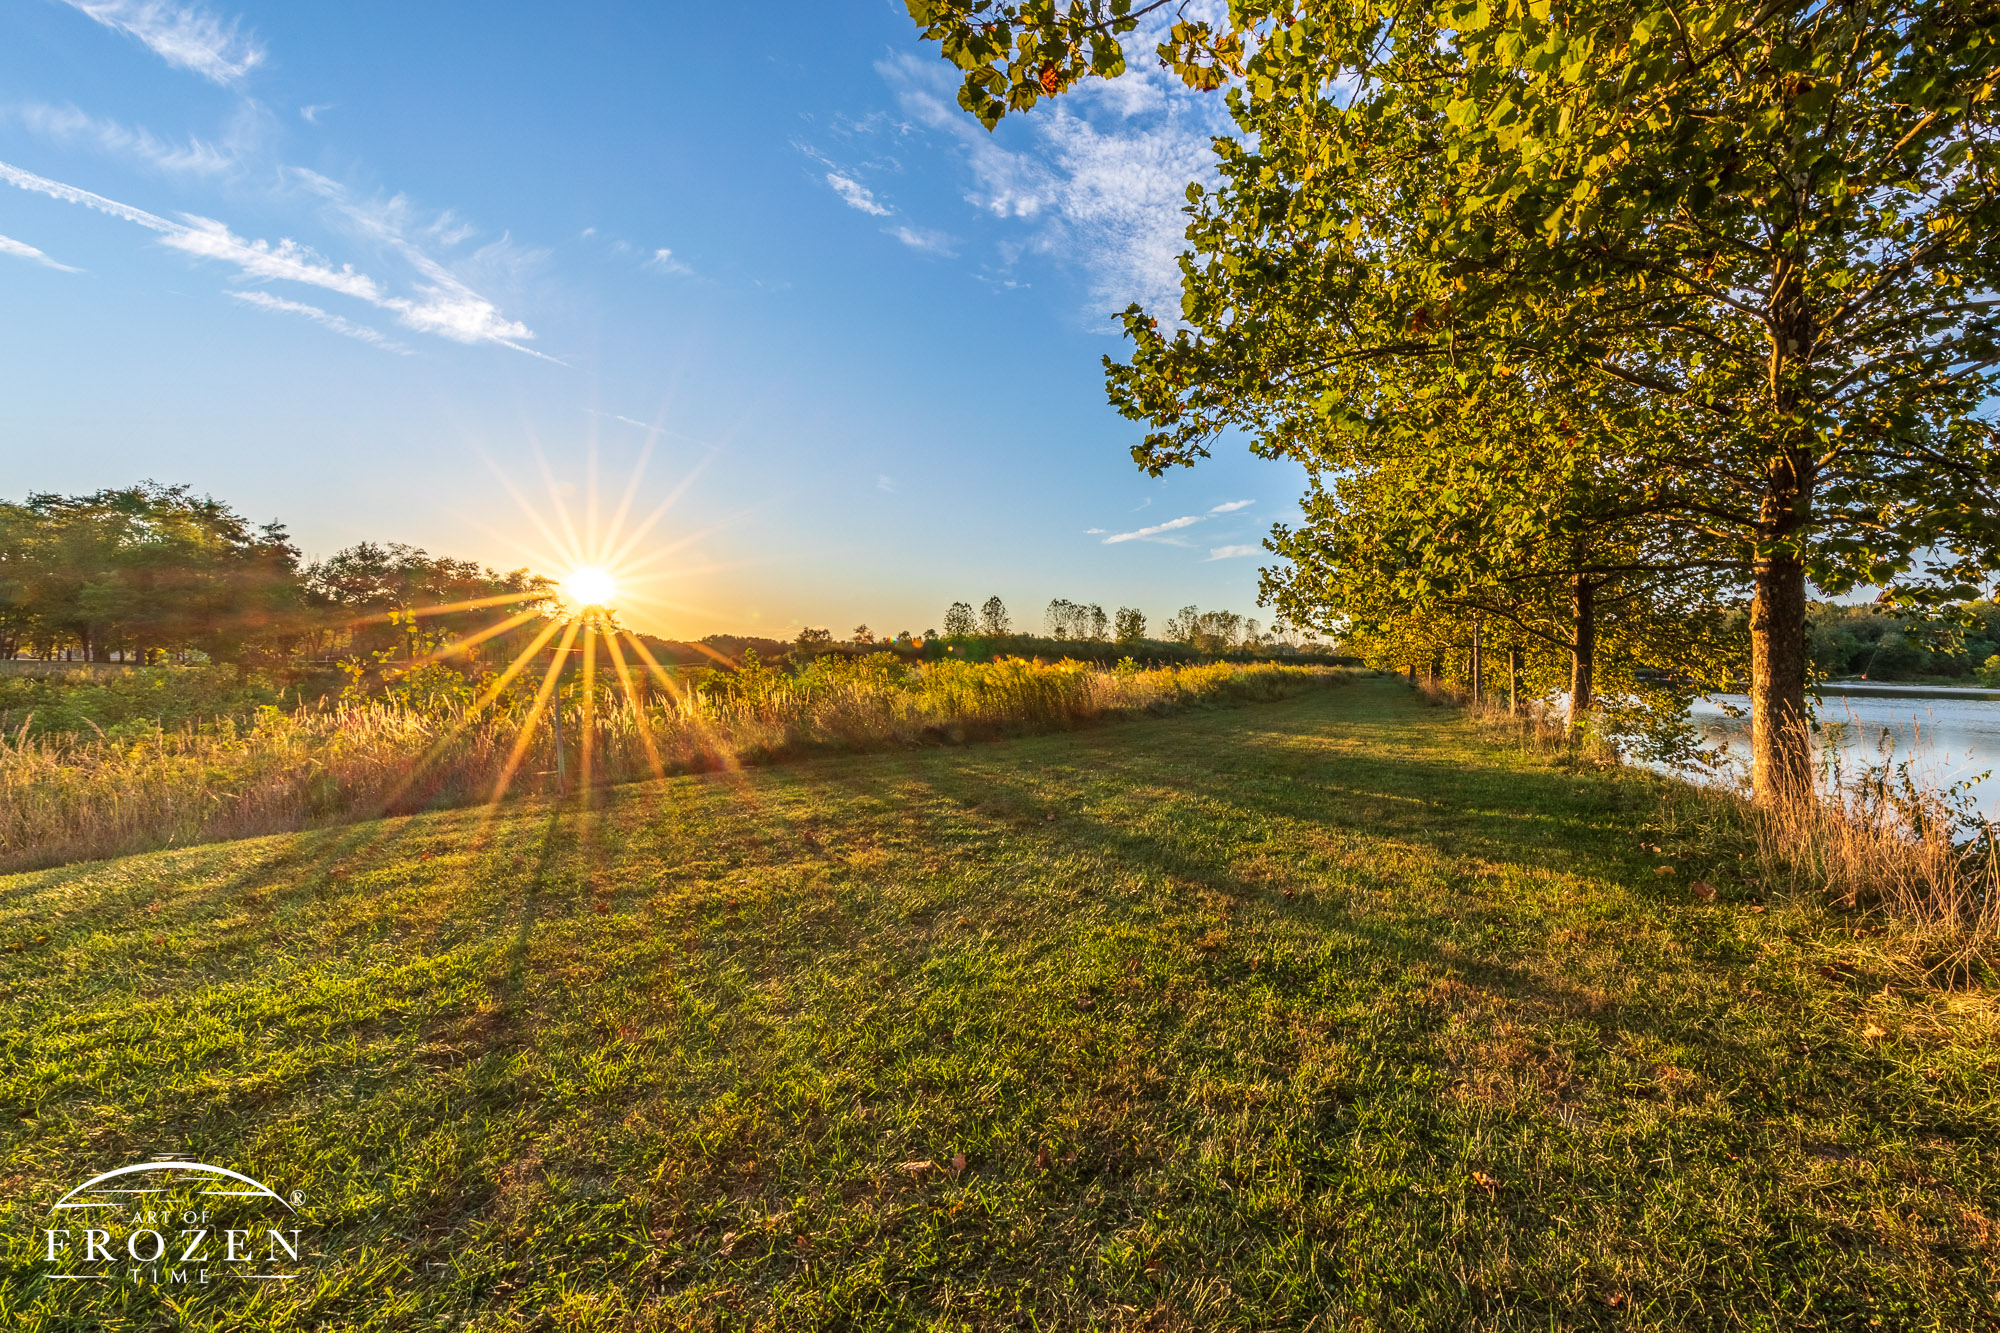 A wide hiking trail through a meadow along the Great Miami River, where the setting sun cast a warm light against the green vegetation.